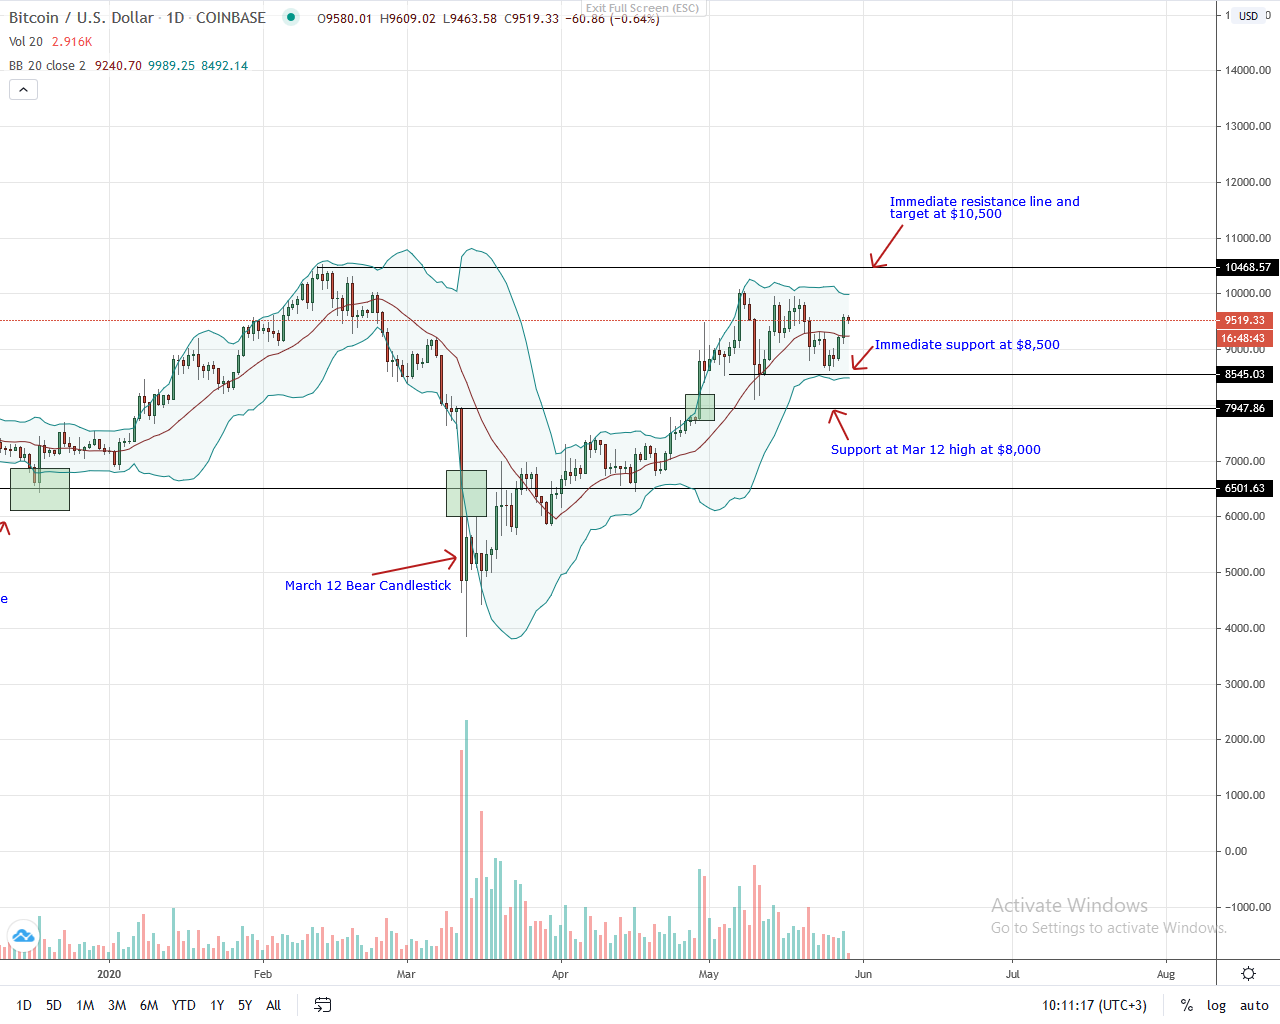 Bitcoin Daily Chart for May 29